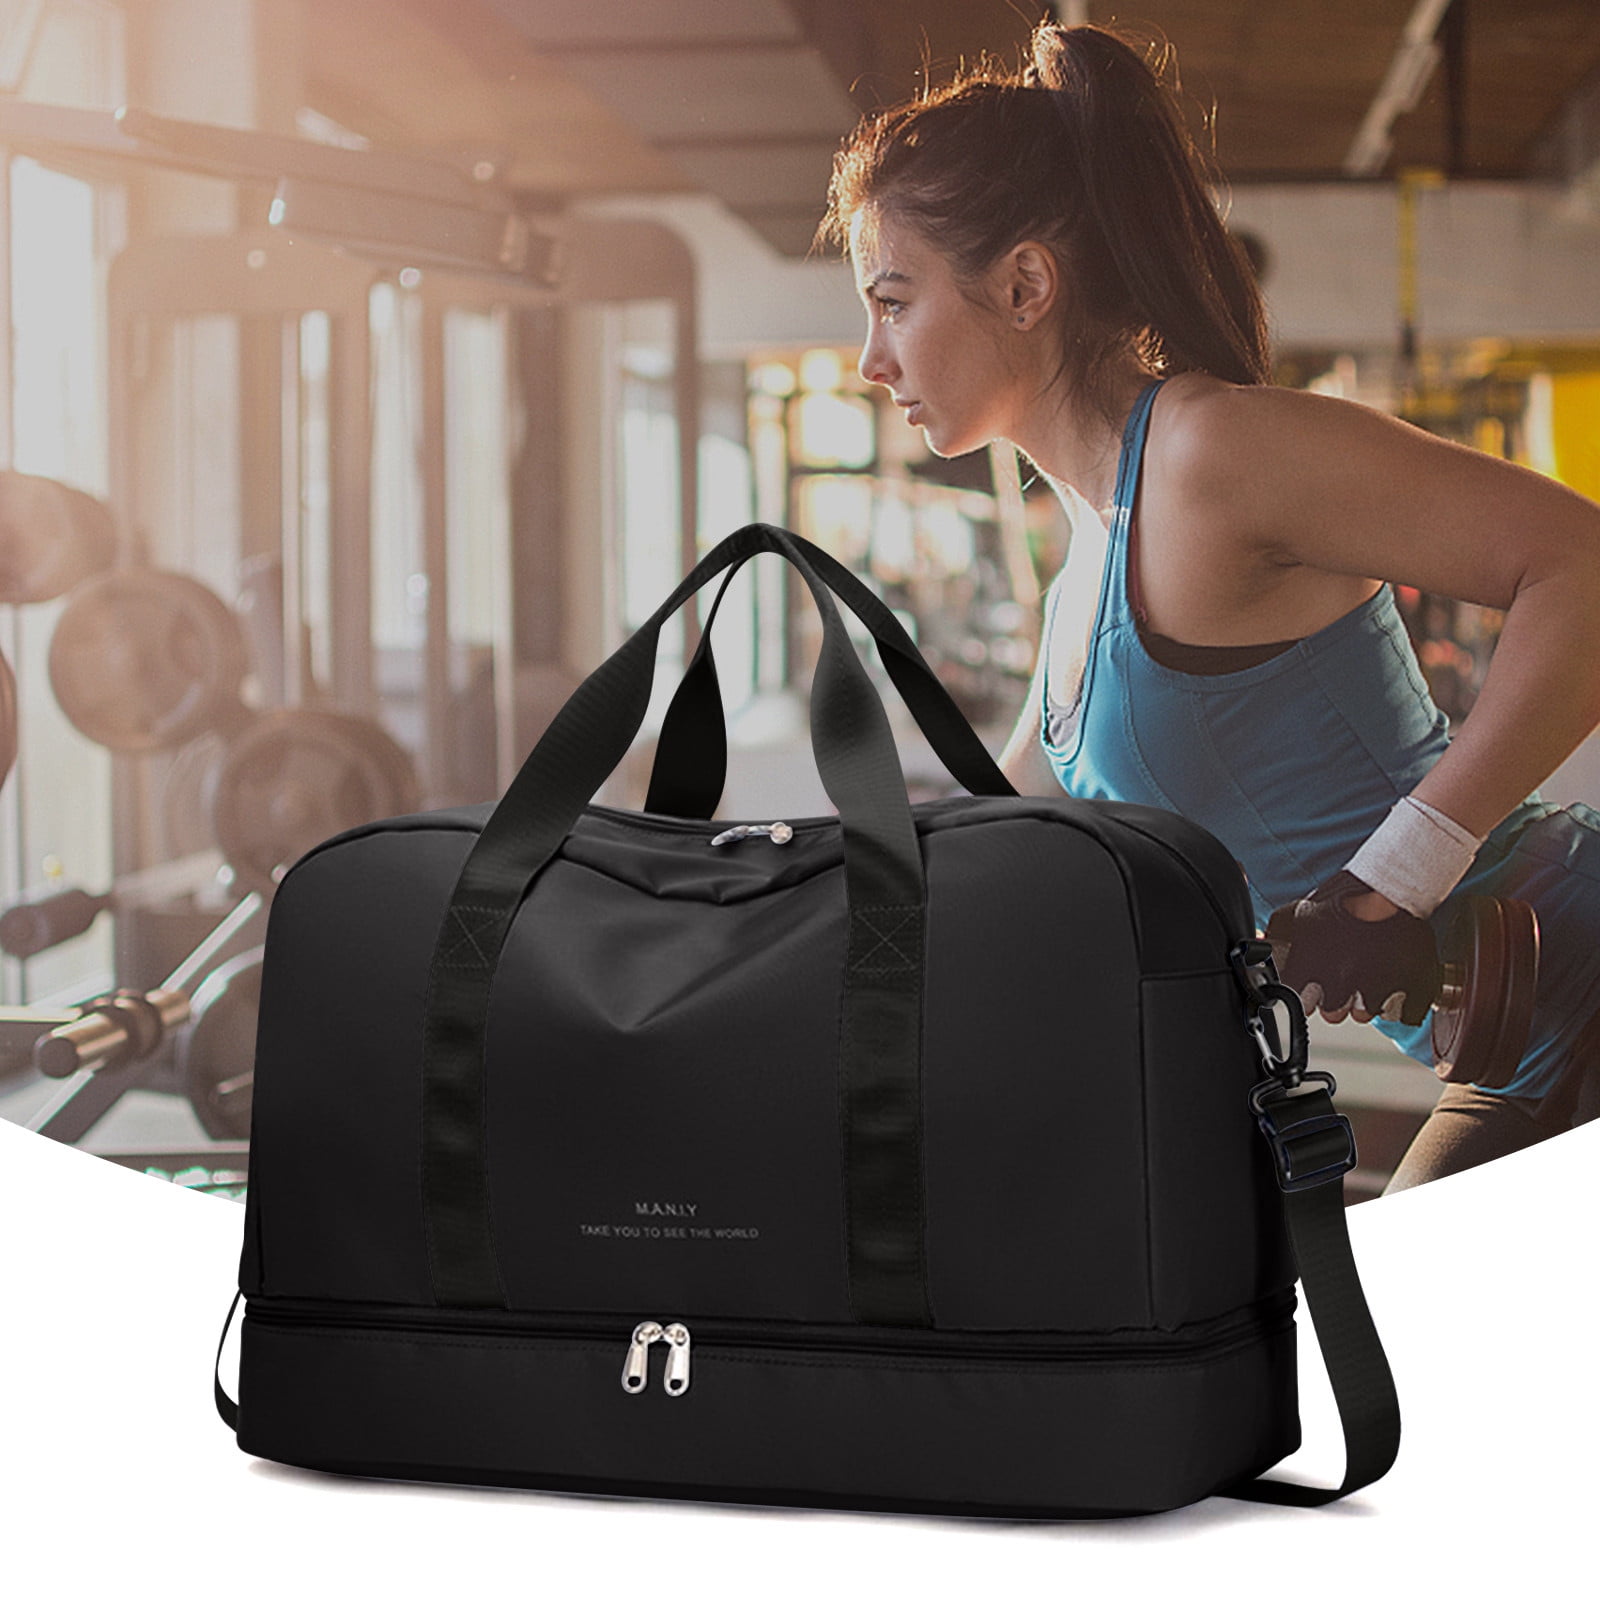 Expandable Gym Bags Duffle Bags For Sports And Weekend Travel Large  Capacity Lightweight Overnight Bags For Men And Women Travel Duffel Bags  Sports Tote Bag  Walmartcom